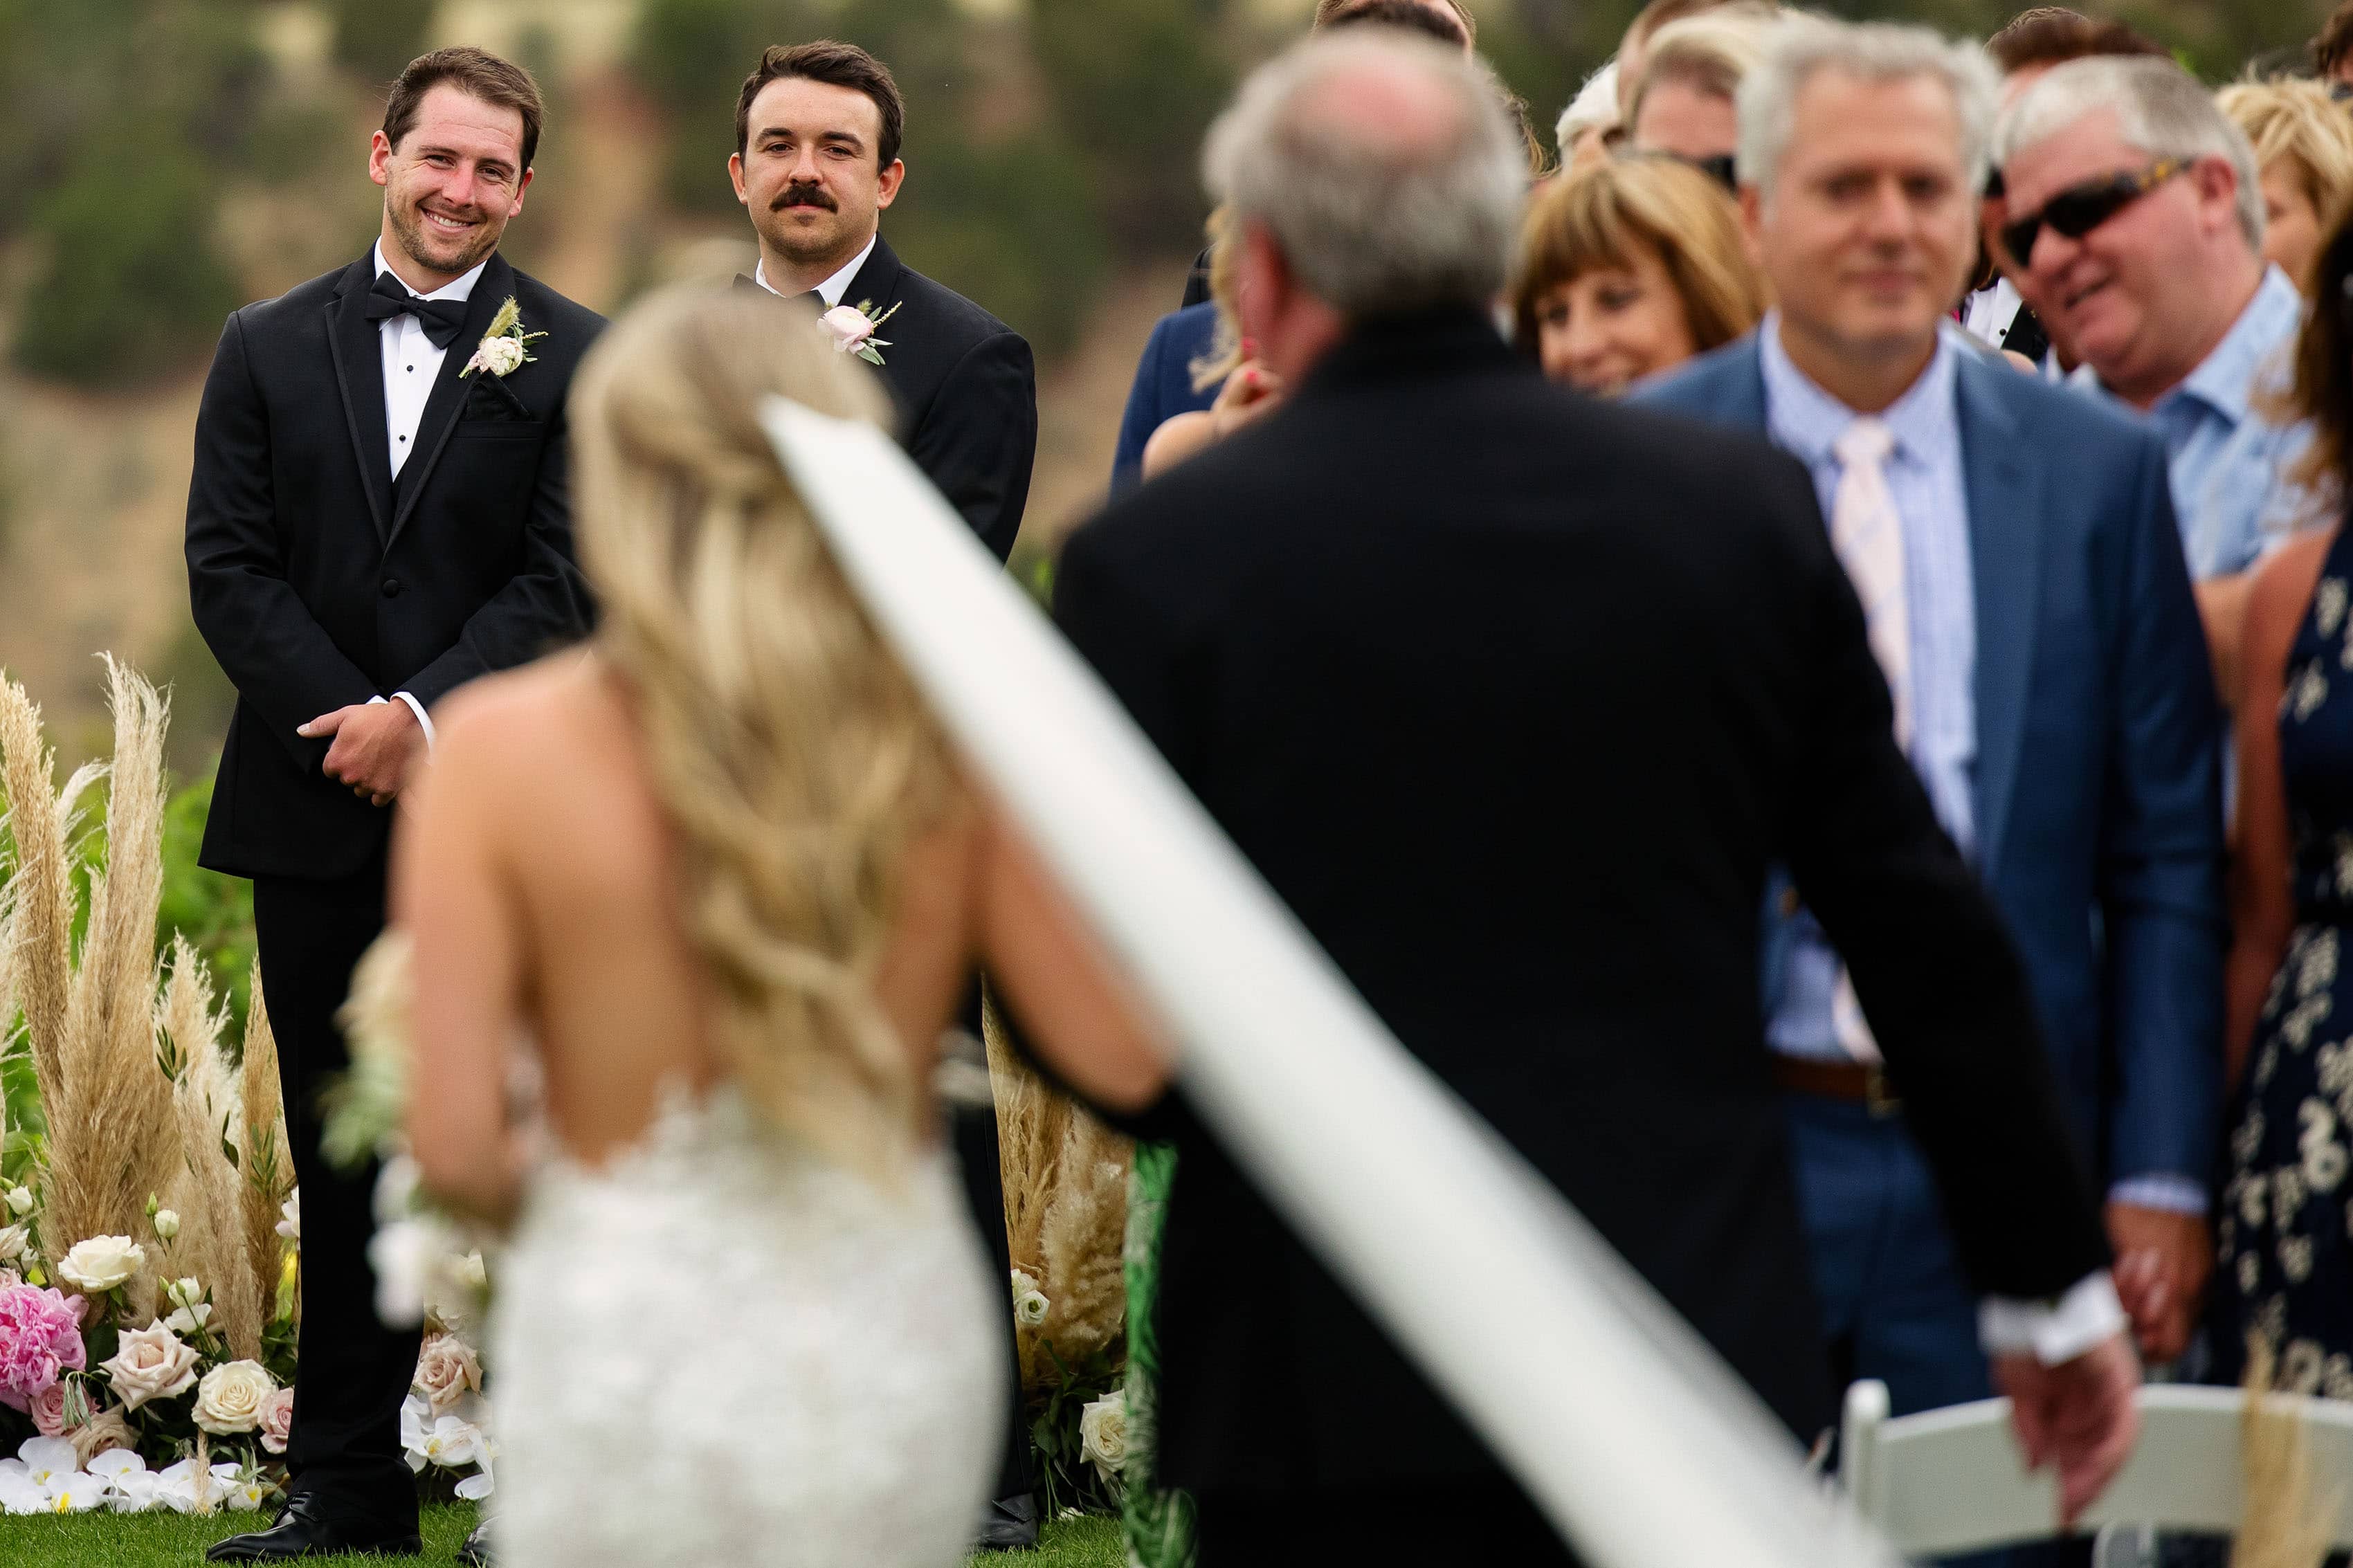 The grooms smiles as the bride walks down the aisle